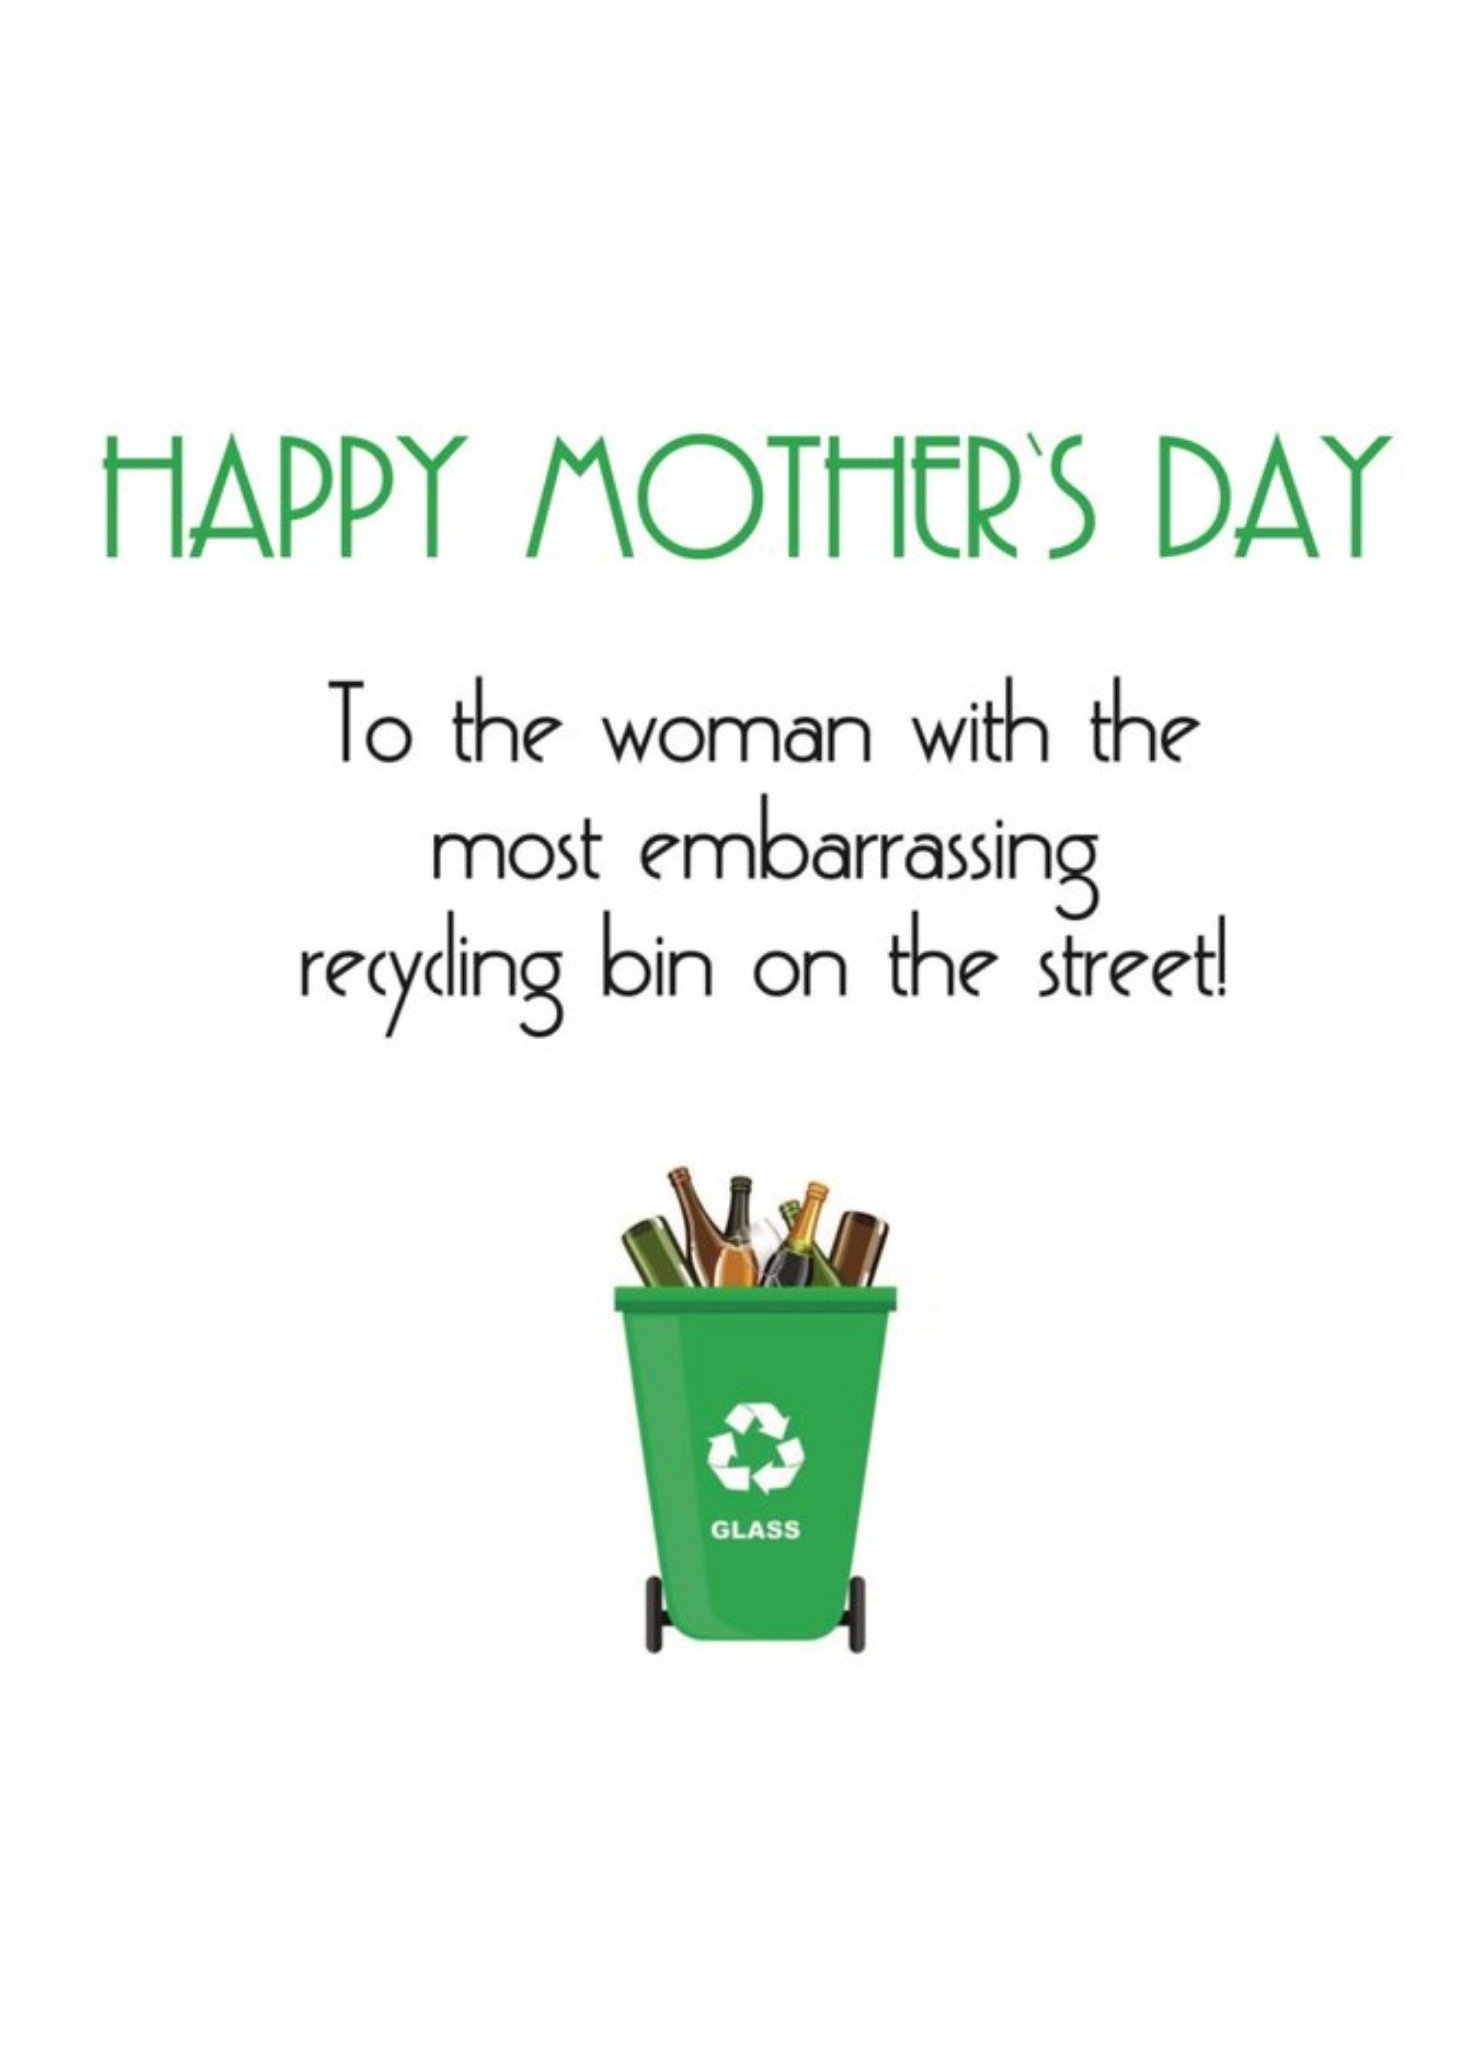 Banter King Typographical Happy Mothers Day Most Embarrassing Recycling Bin On The Street Card Ecard